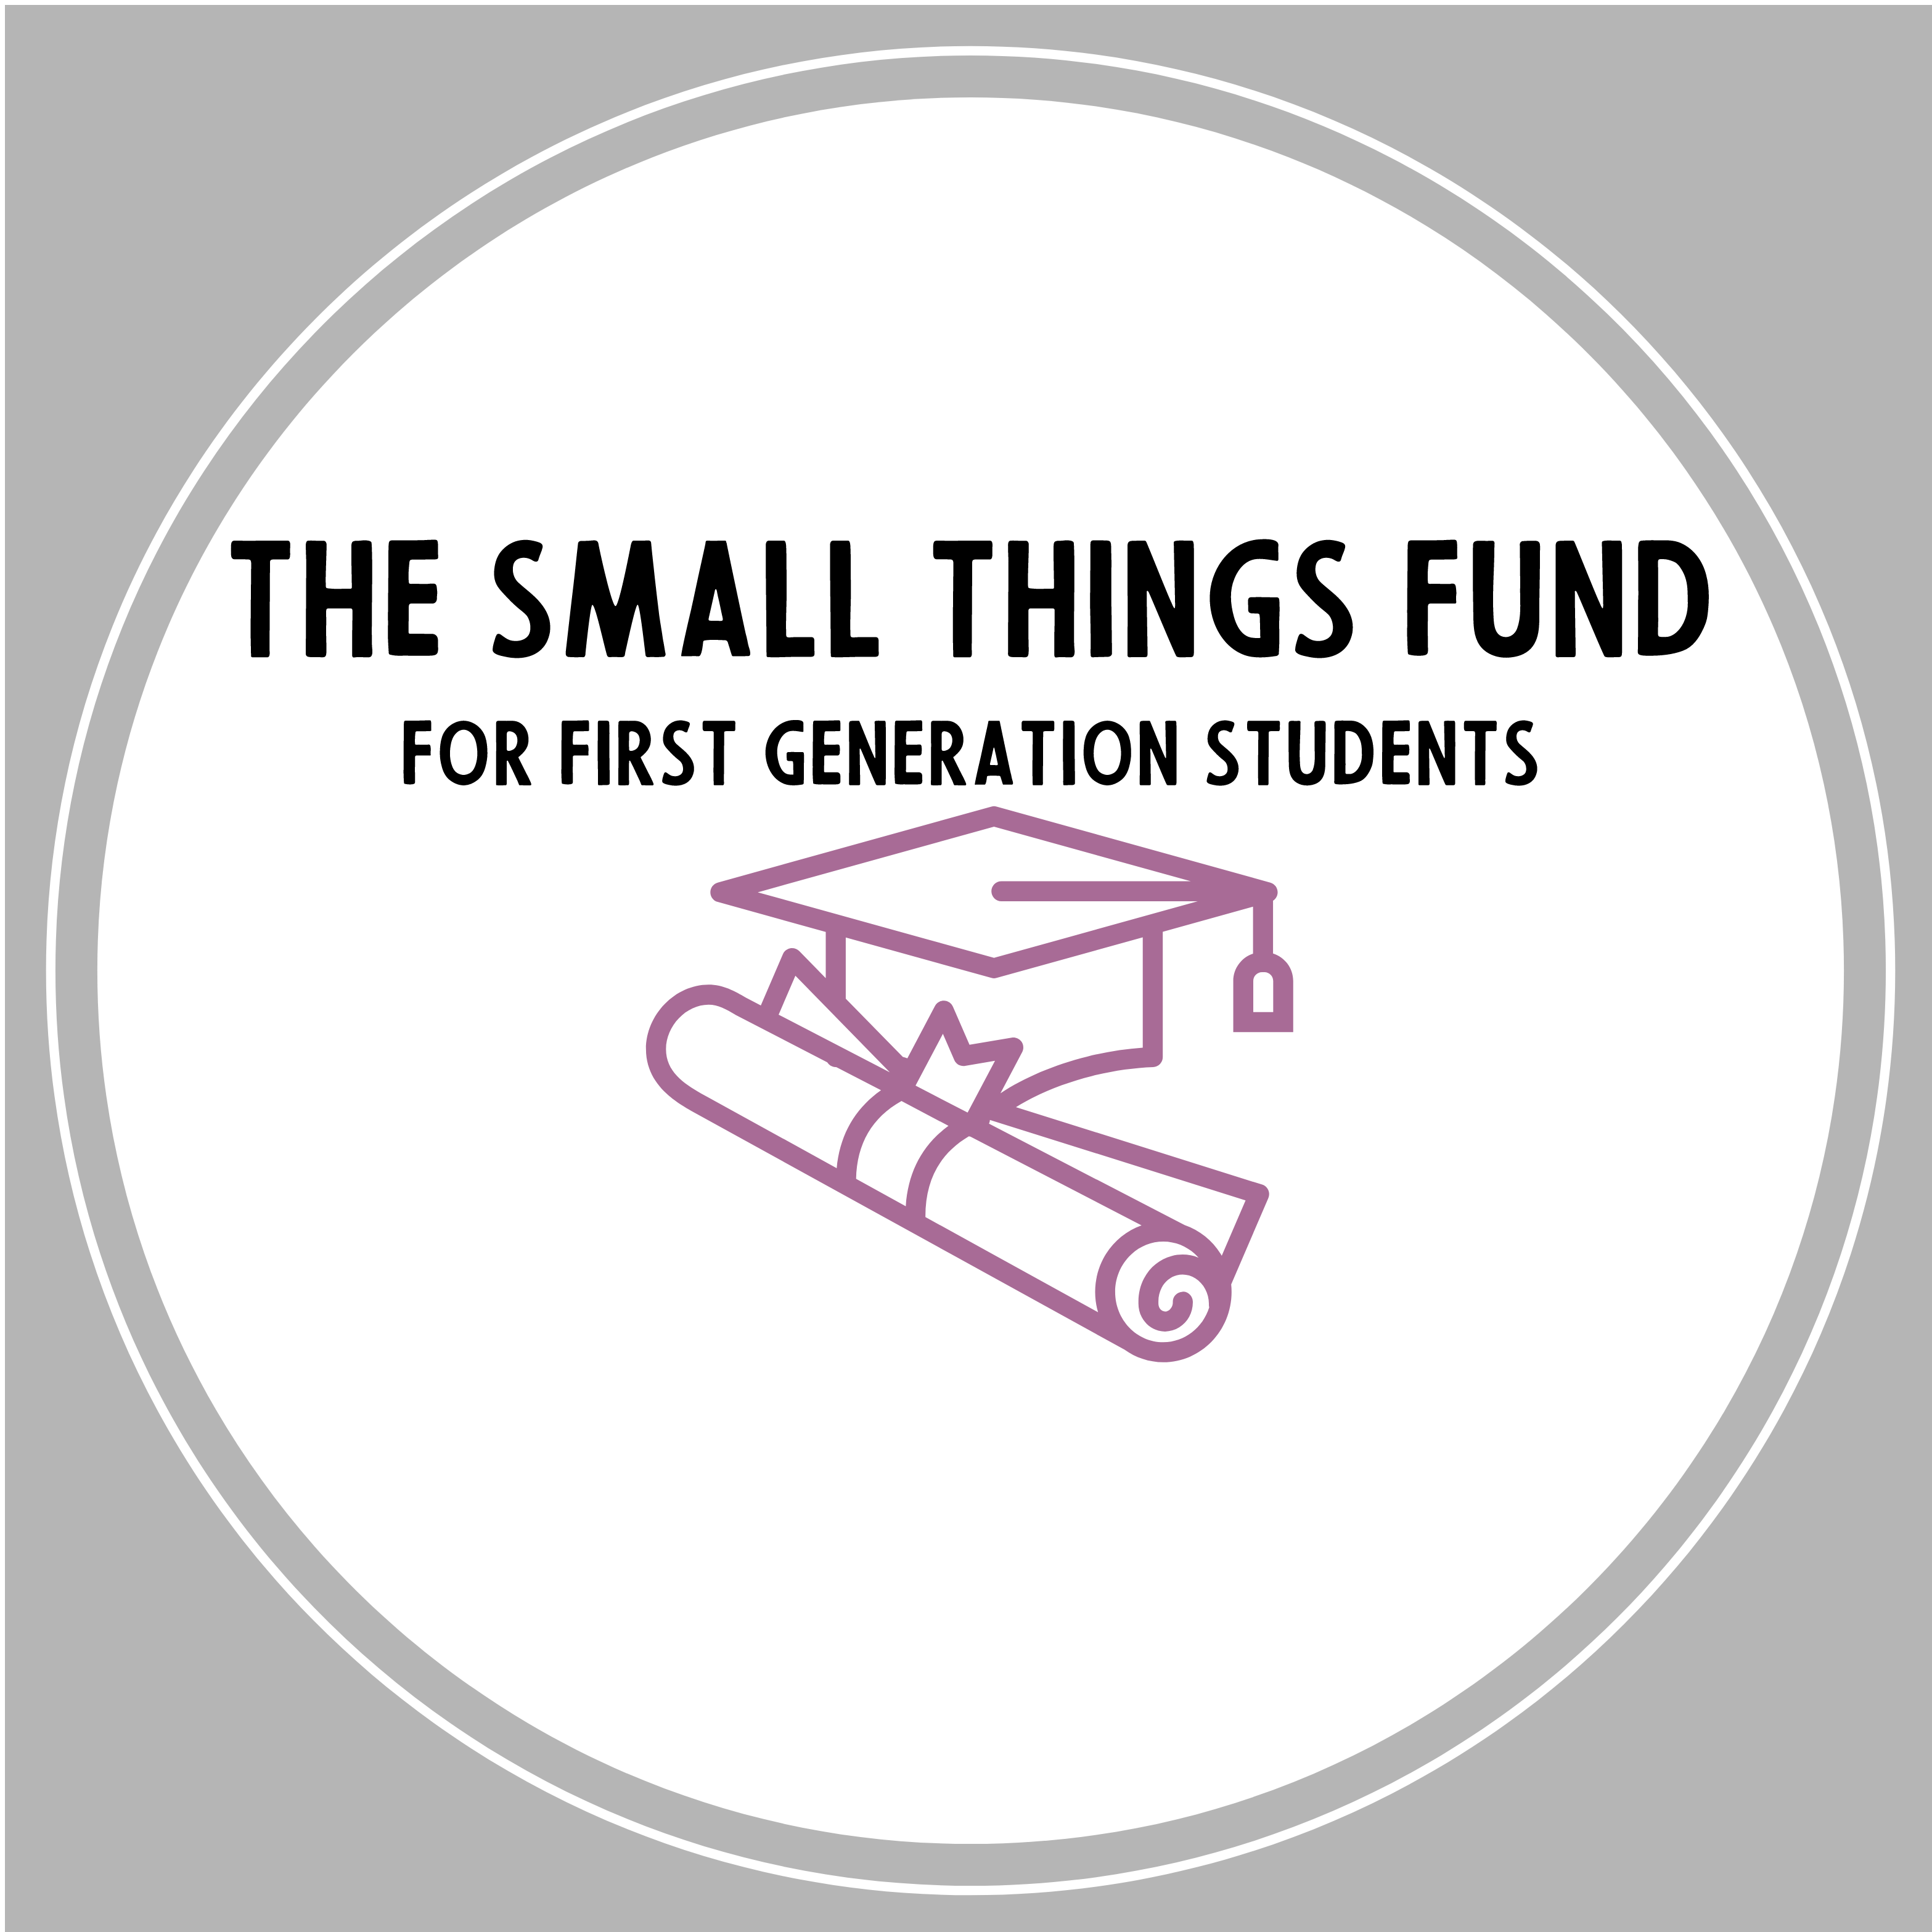 The Small Things Fund